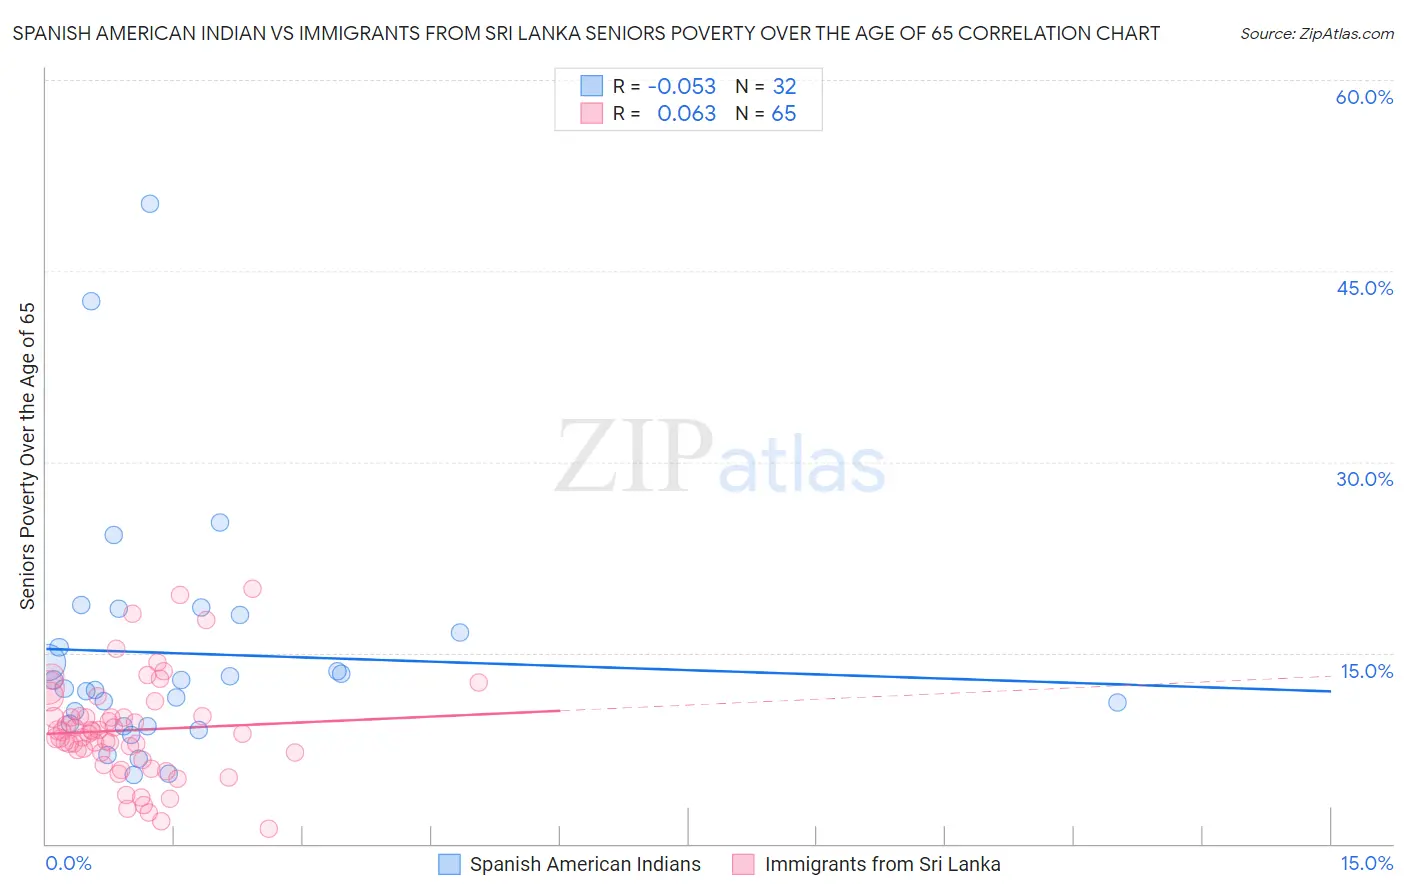 Spanish American Indian vs Immigrants from Sri Lanka Seniors Poverty Over the Age of 65